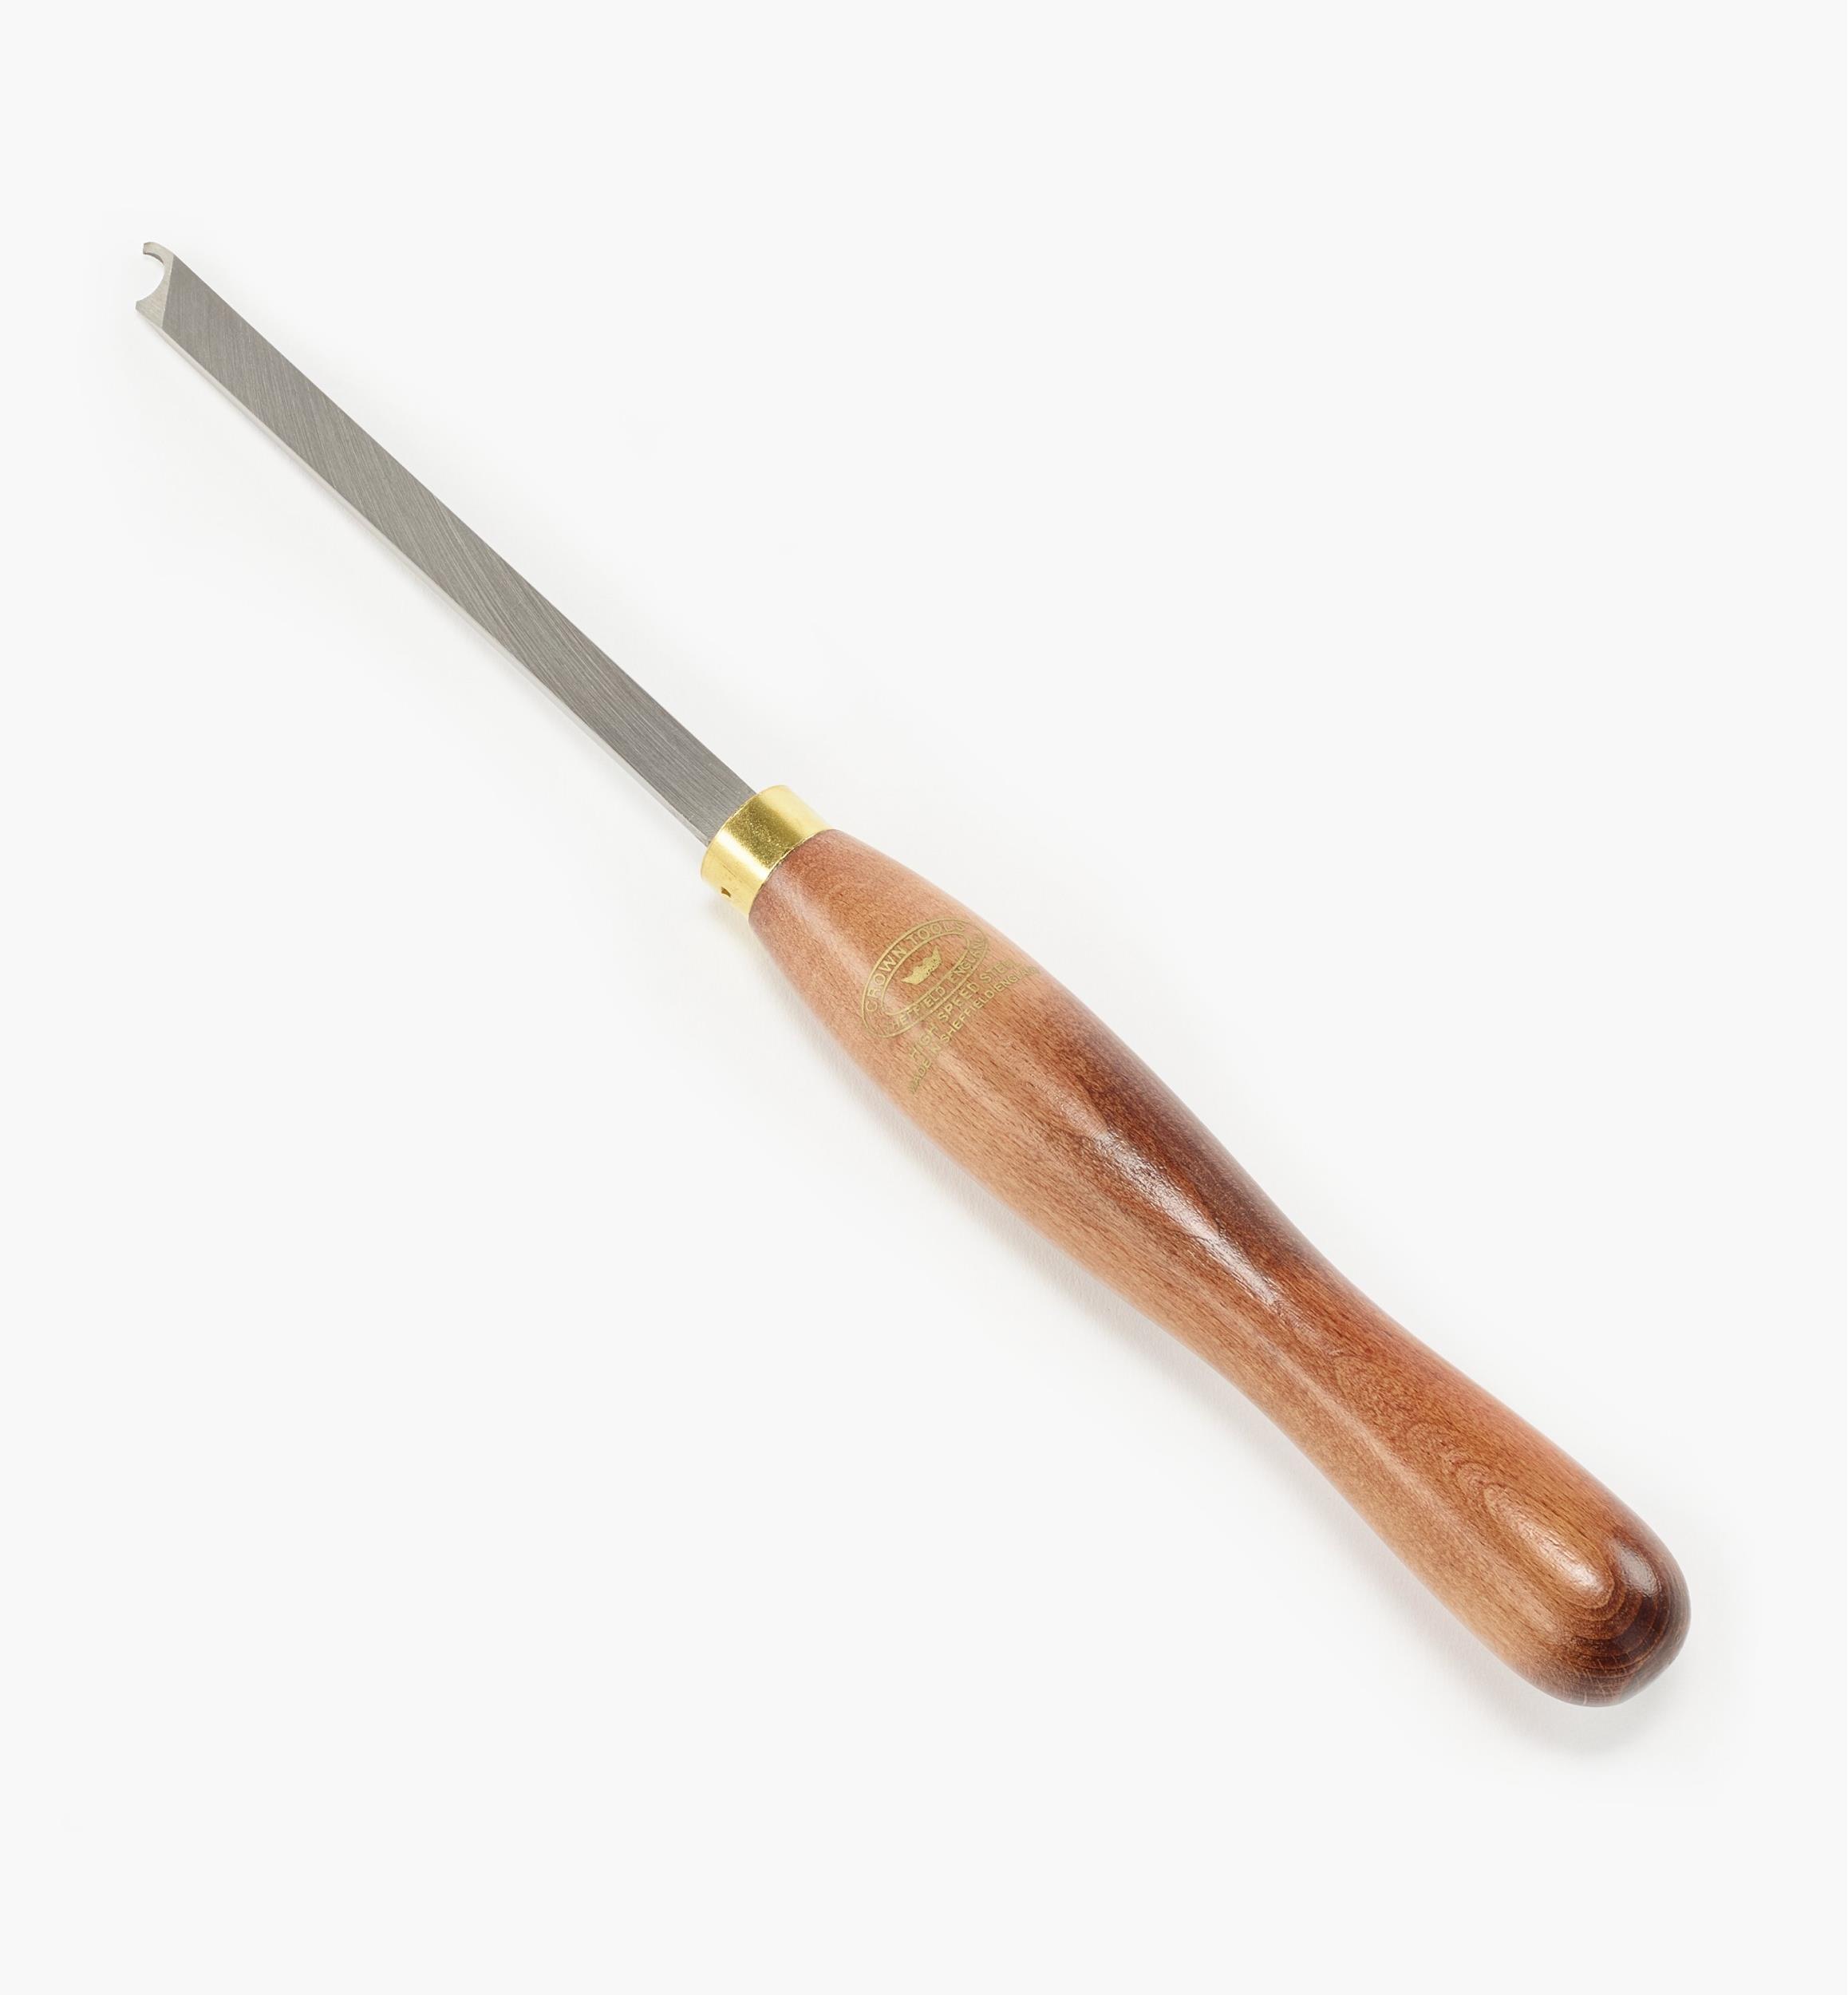 HSS Woodworking Captive Ring TOOL 3/8" 